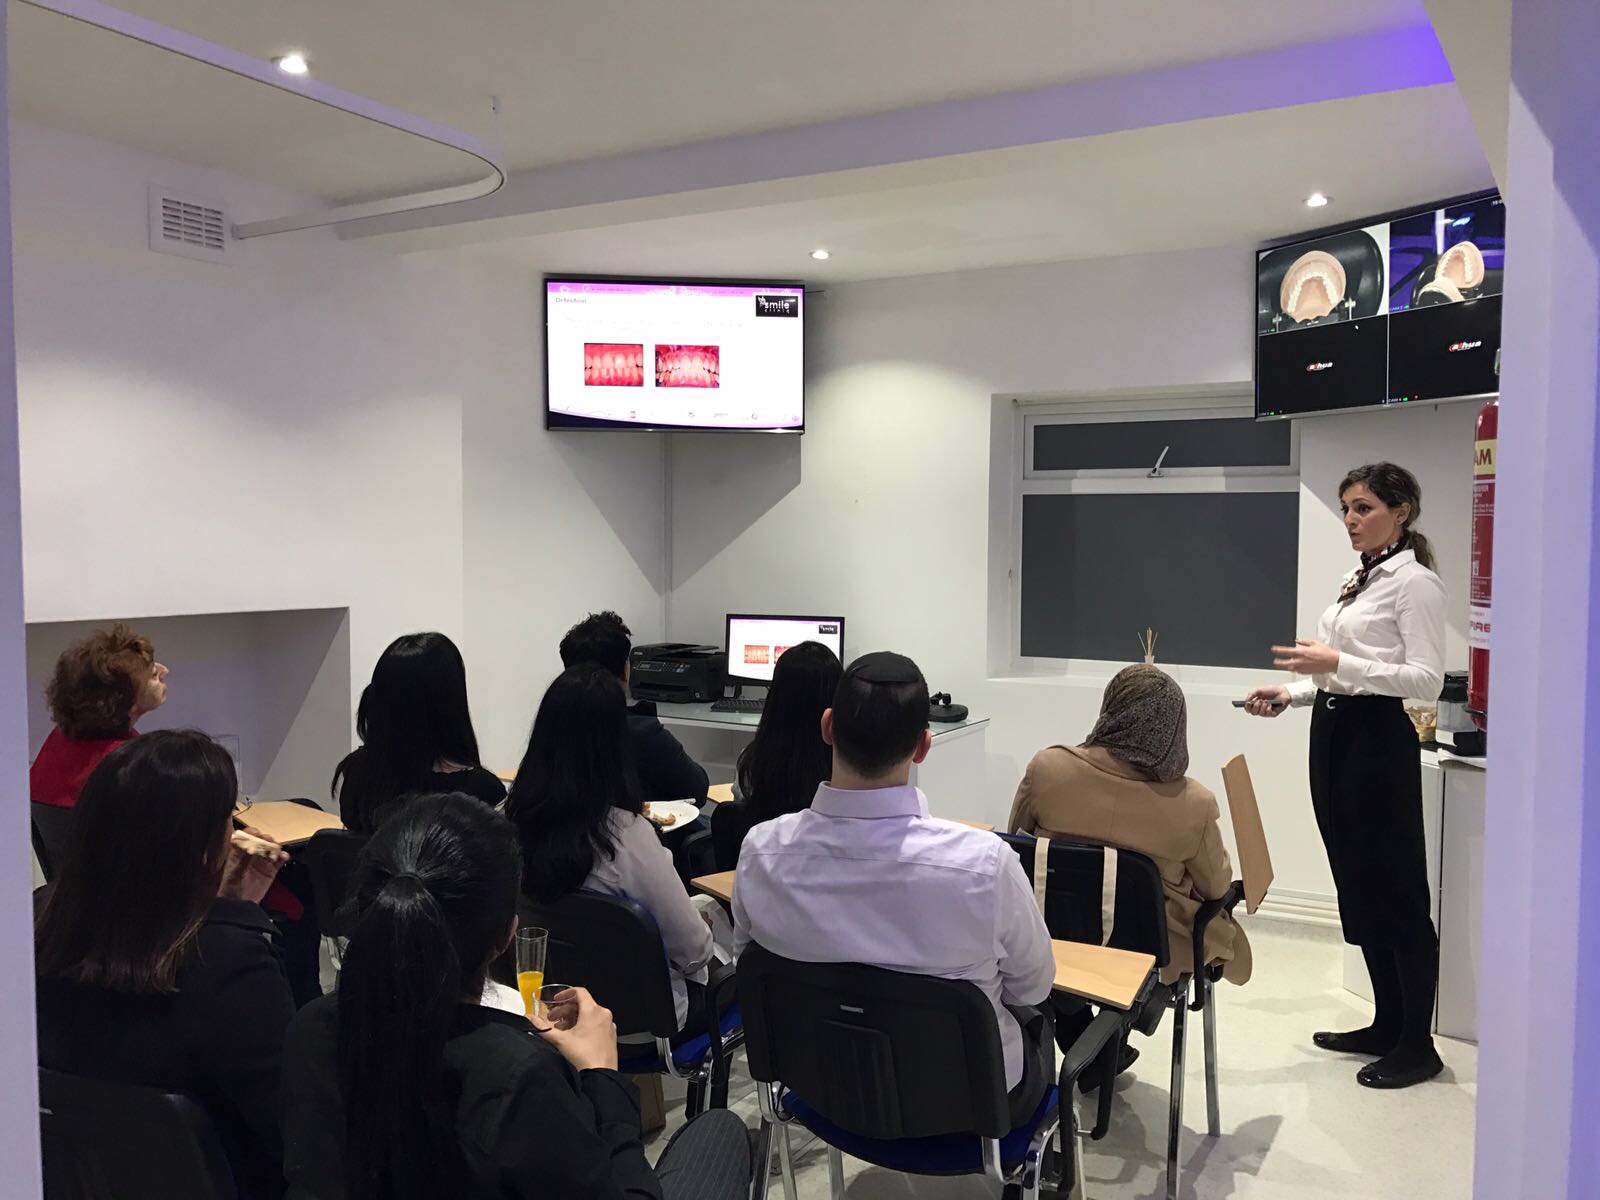 Previous Lectures carried out by Smile Cliniq London Clinical Training Centre